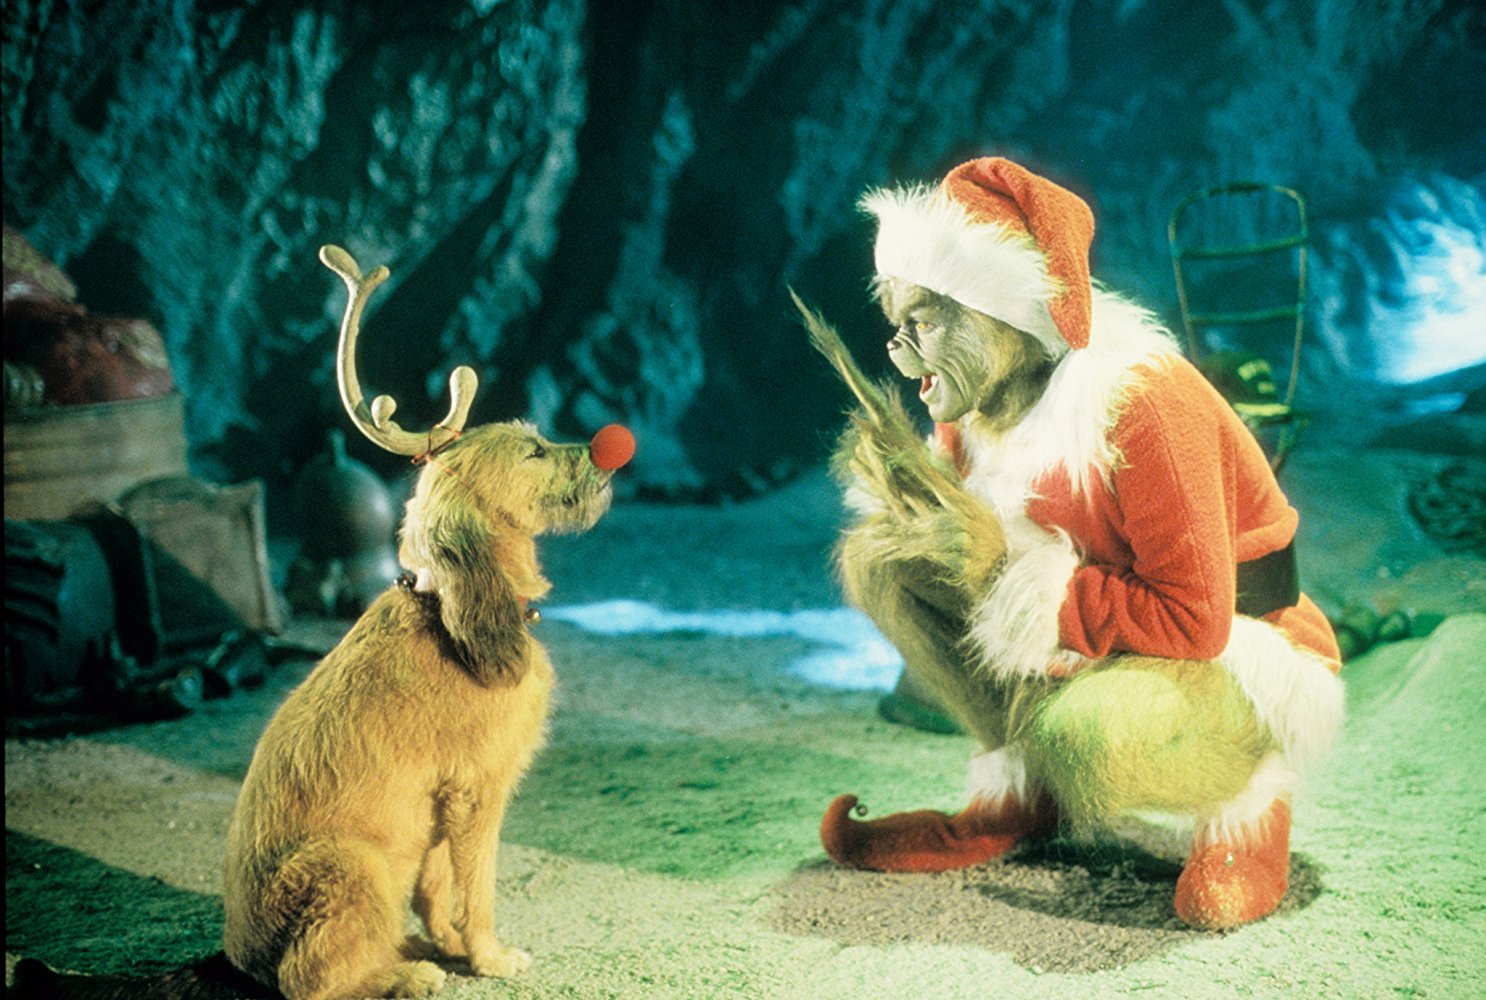 "Christmas Movie"
4. "The Grinch" - wide 6